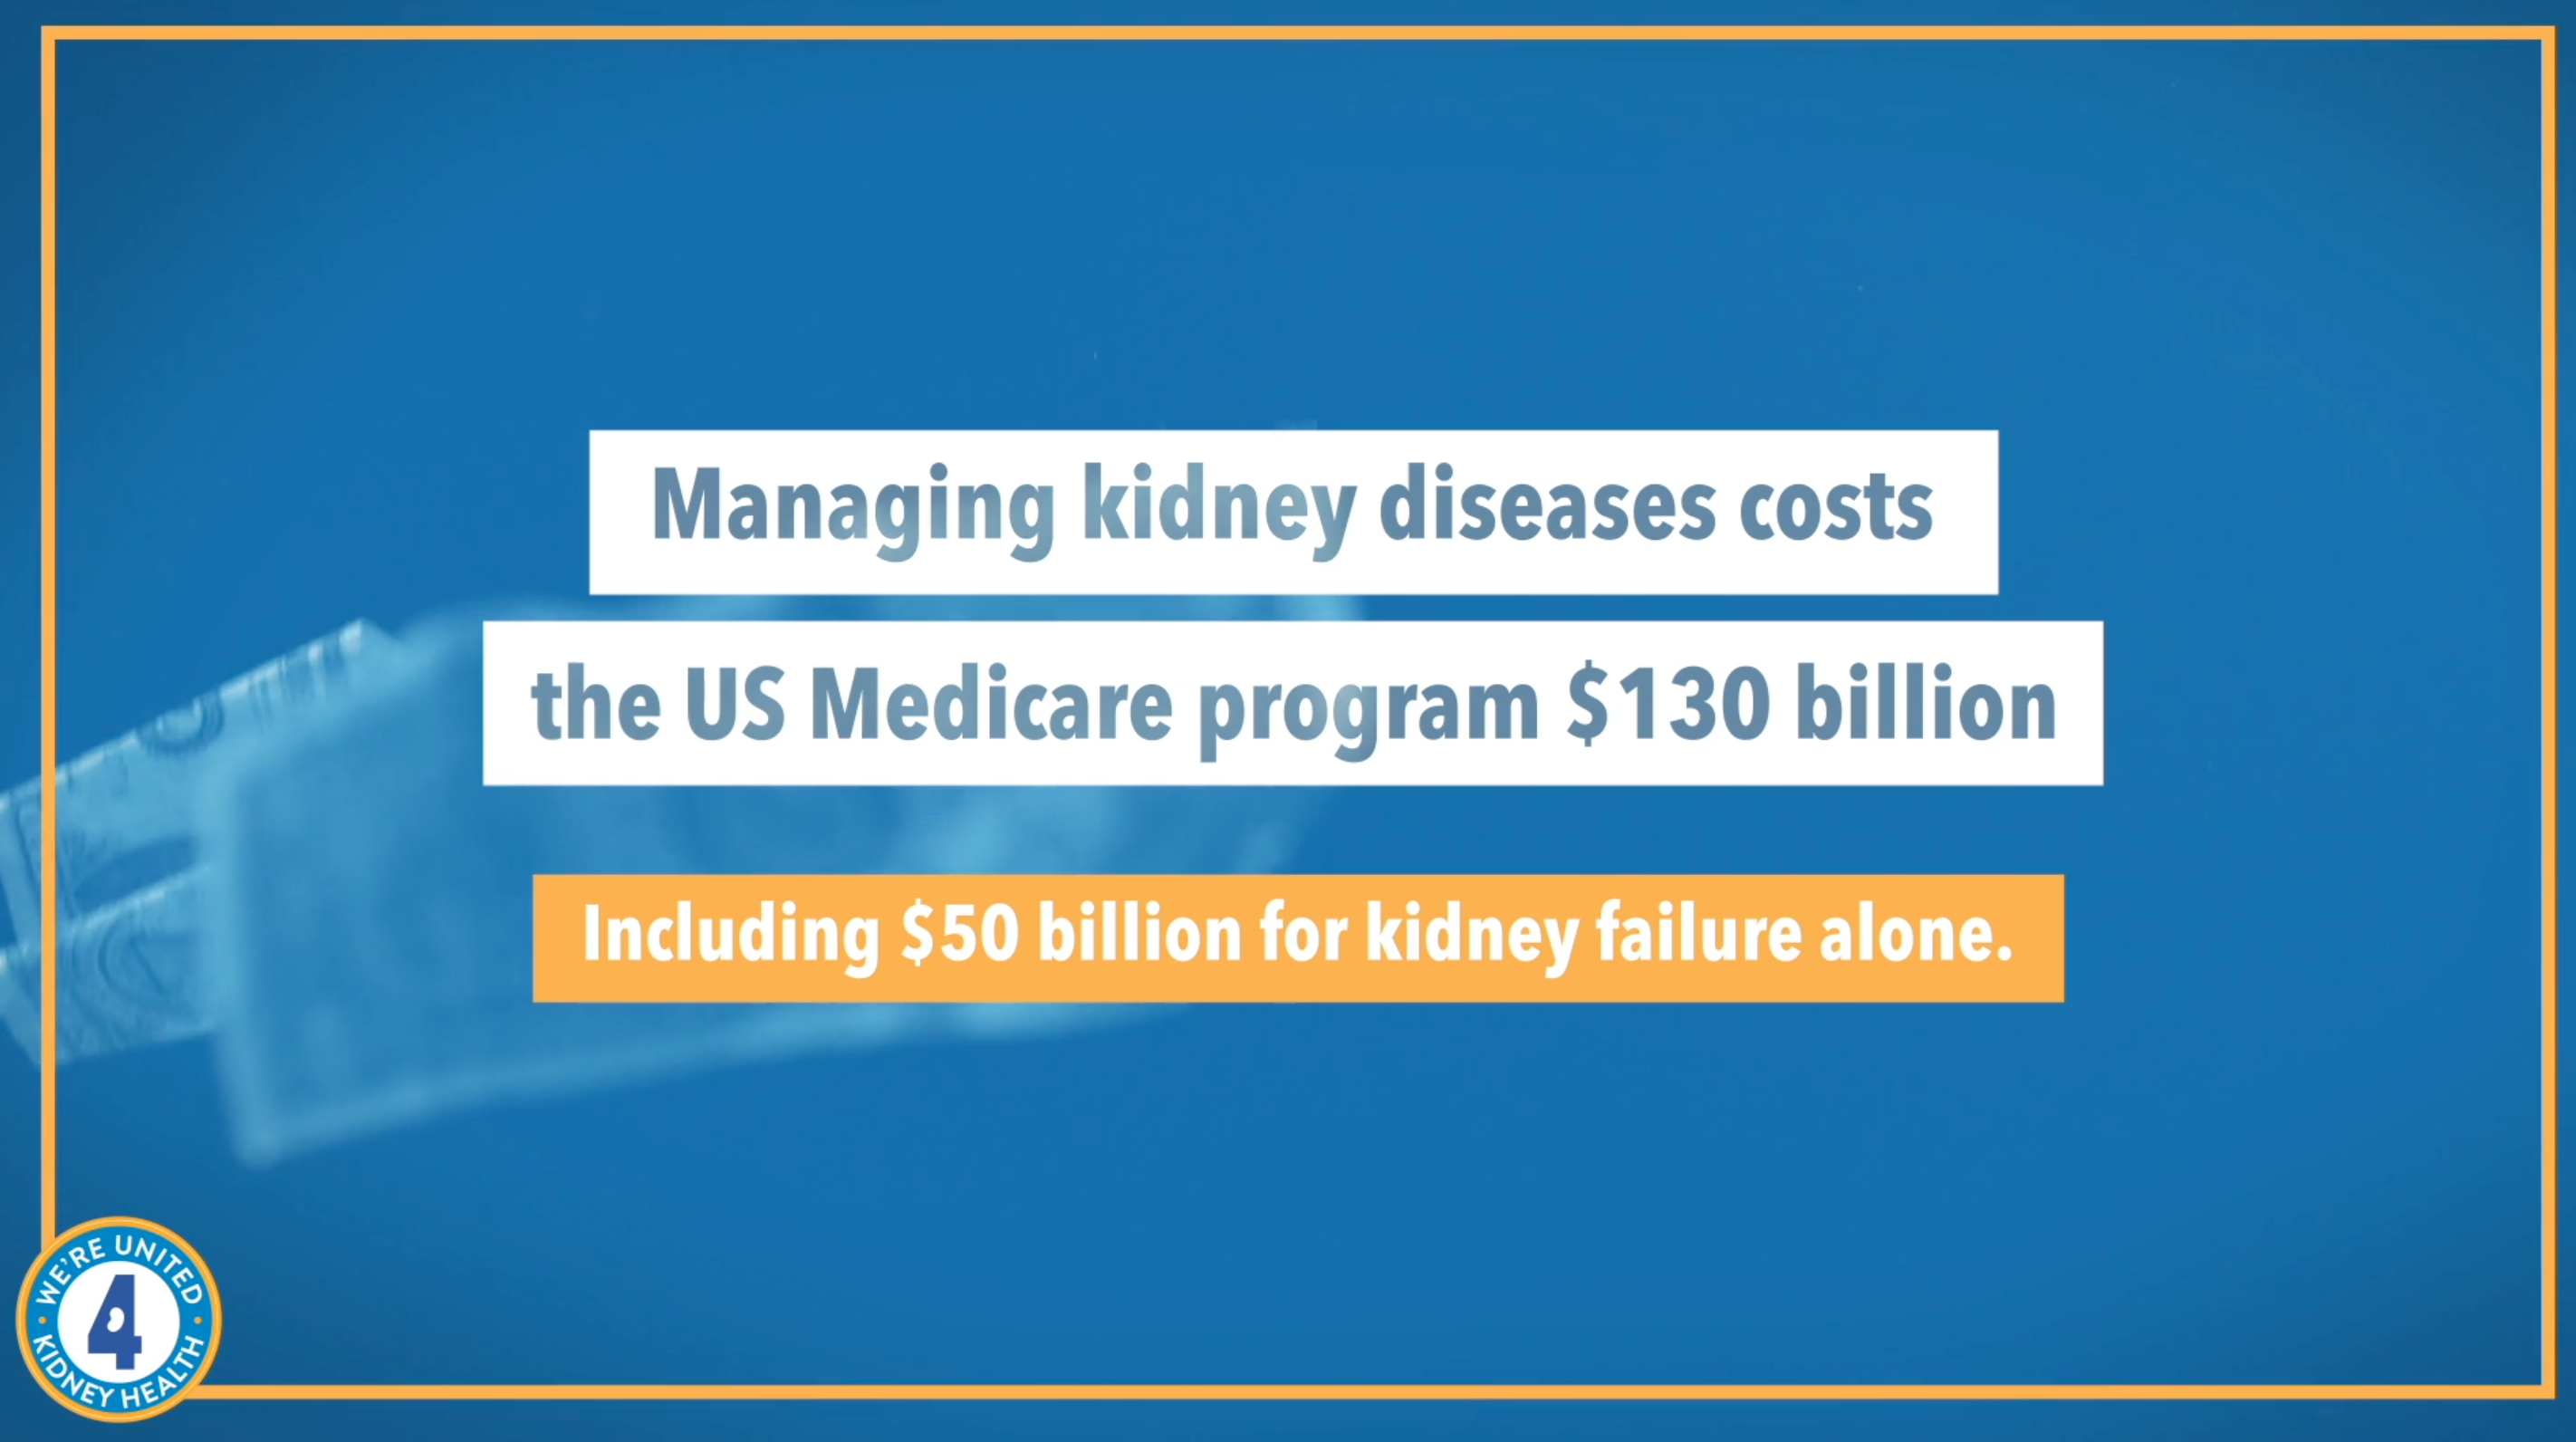 Fast Facts: The cost of managing kidney disease